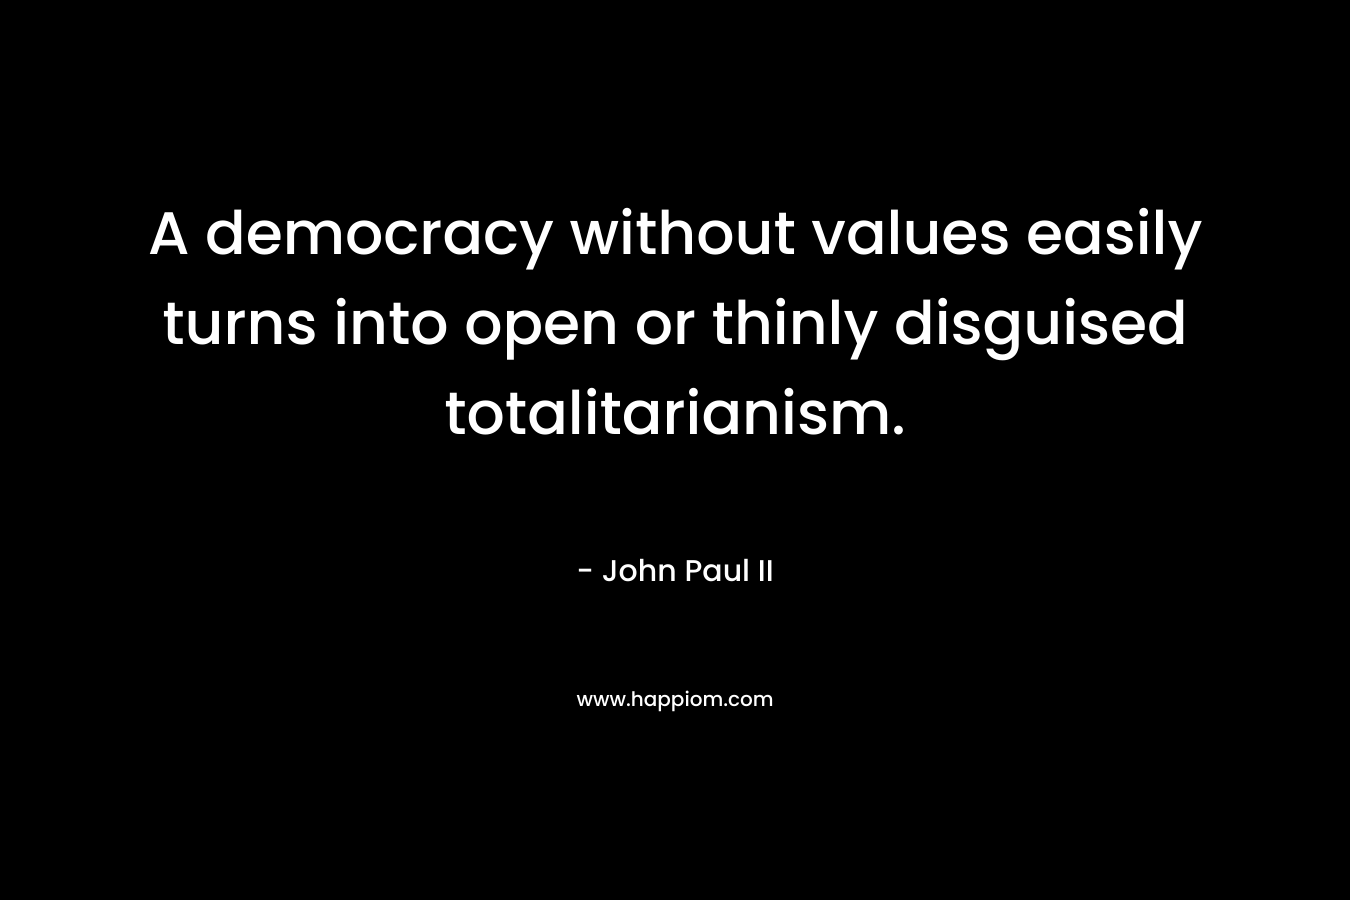 A democracy without values easily turns into open or thinly disguised totalitarianism. – John Paul II